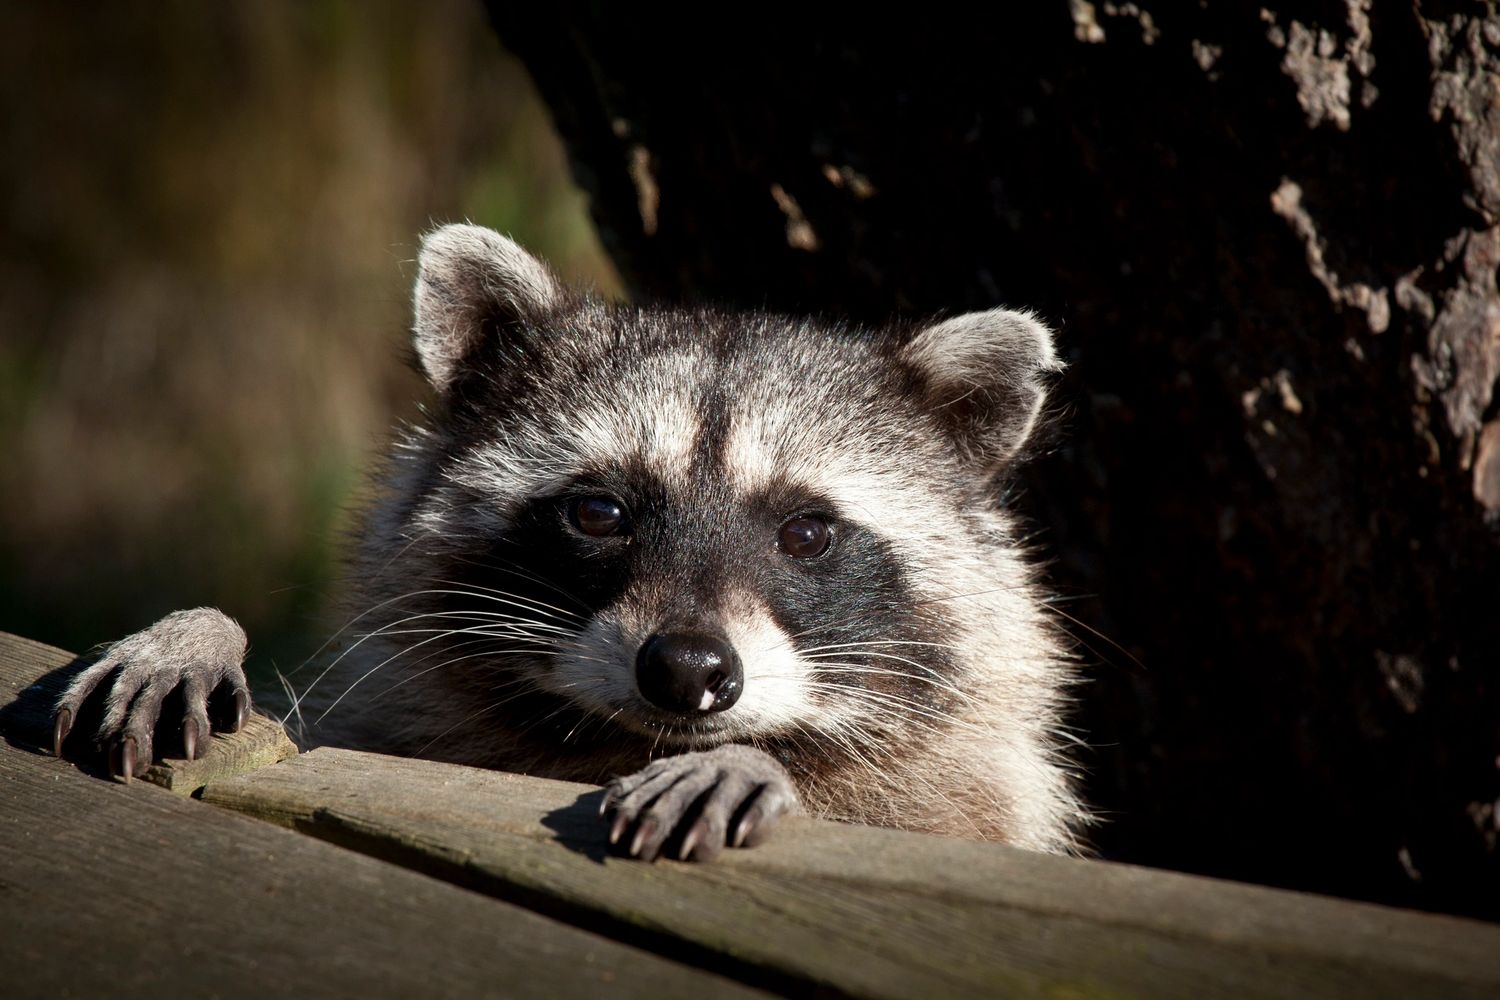 A sweet raccoon peering over a fence.